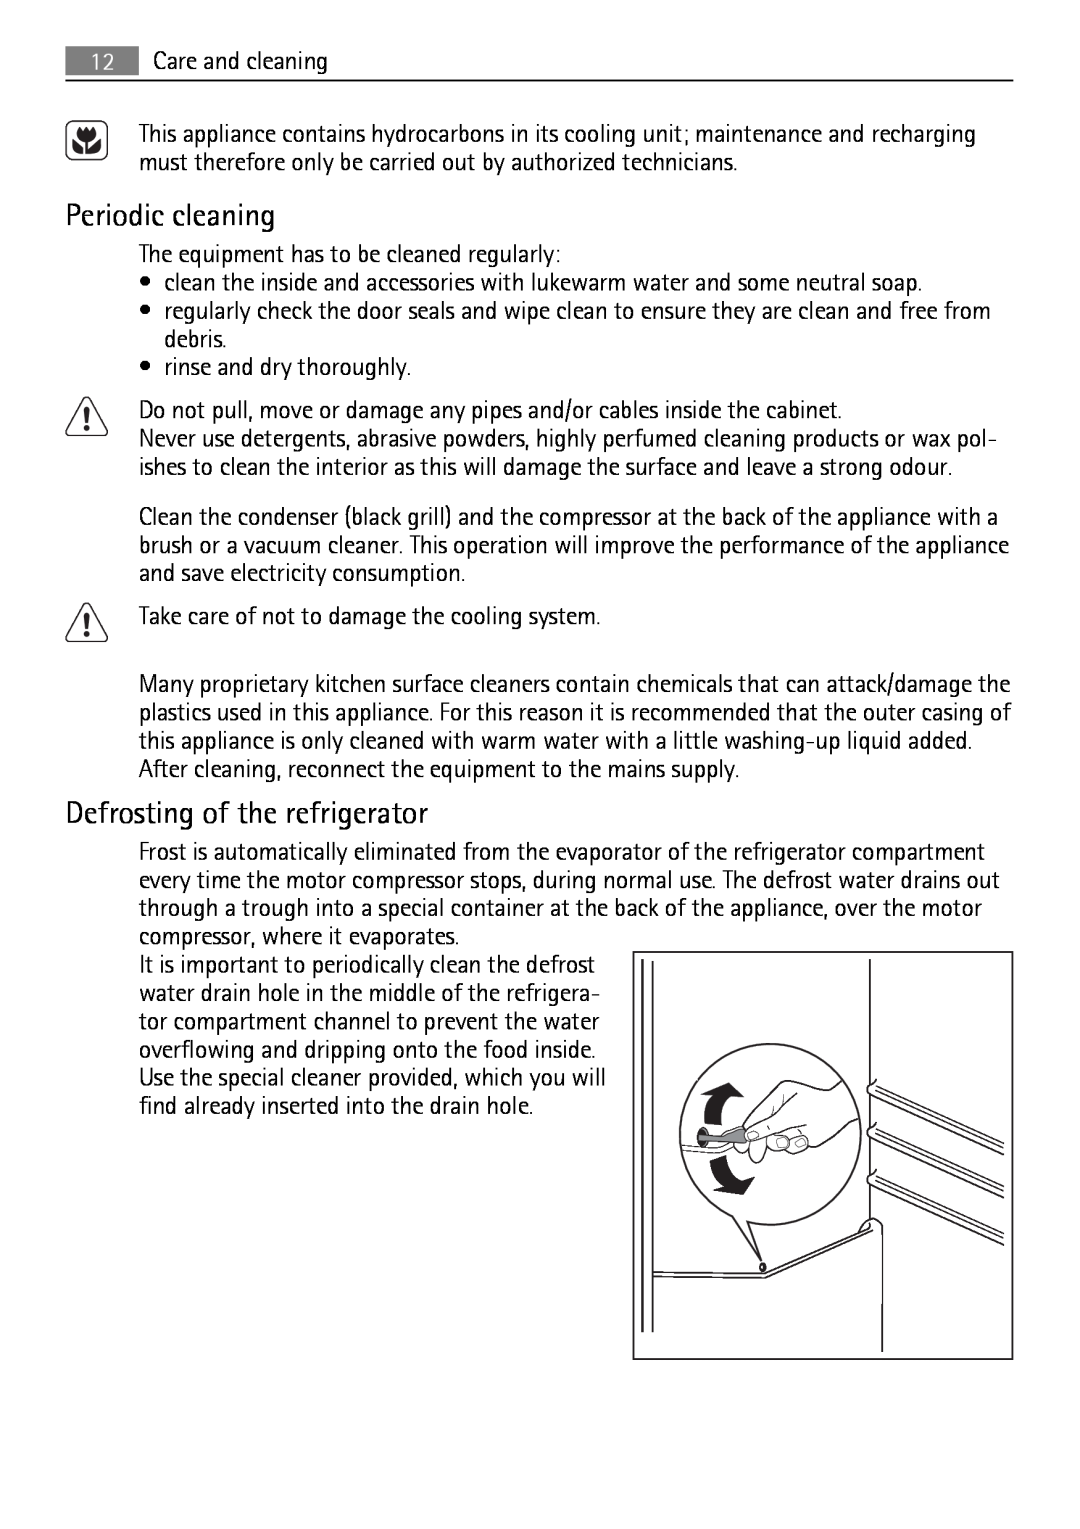 Electrolux 925033134, S75348KG5, 210621236-11052010 user manual Periodic cleaning, Defrosting of the refrigerator 